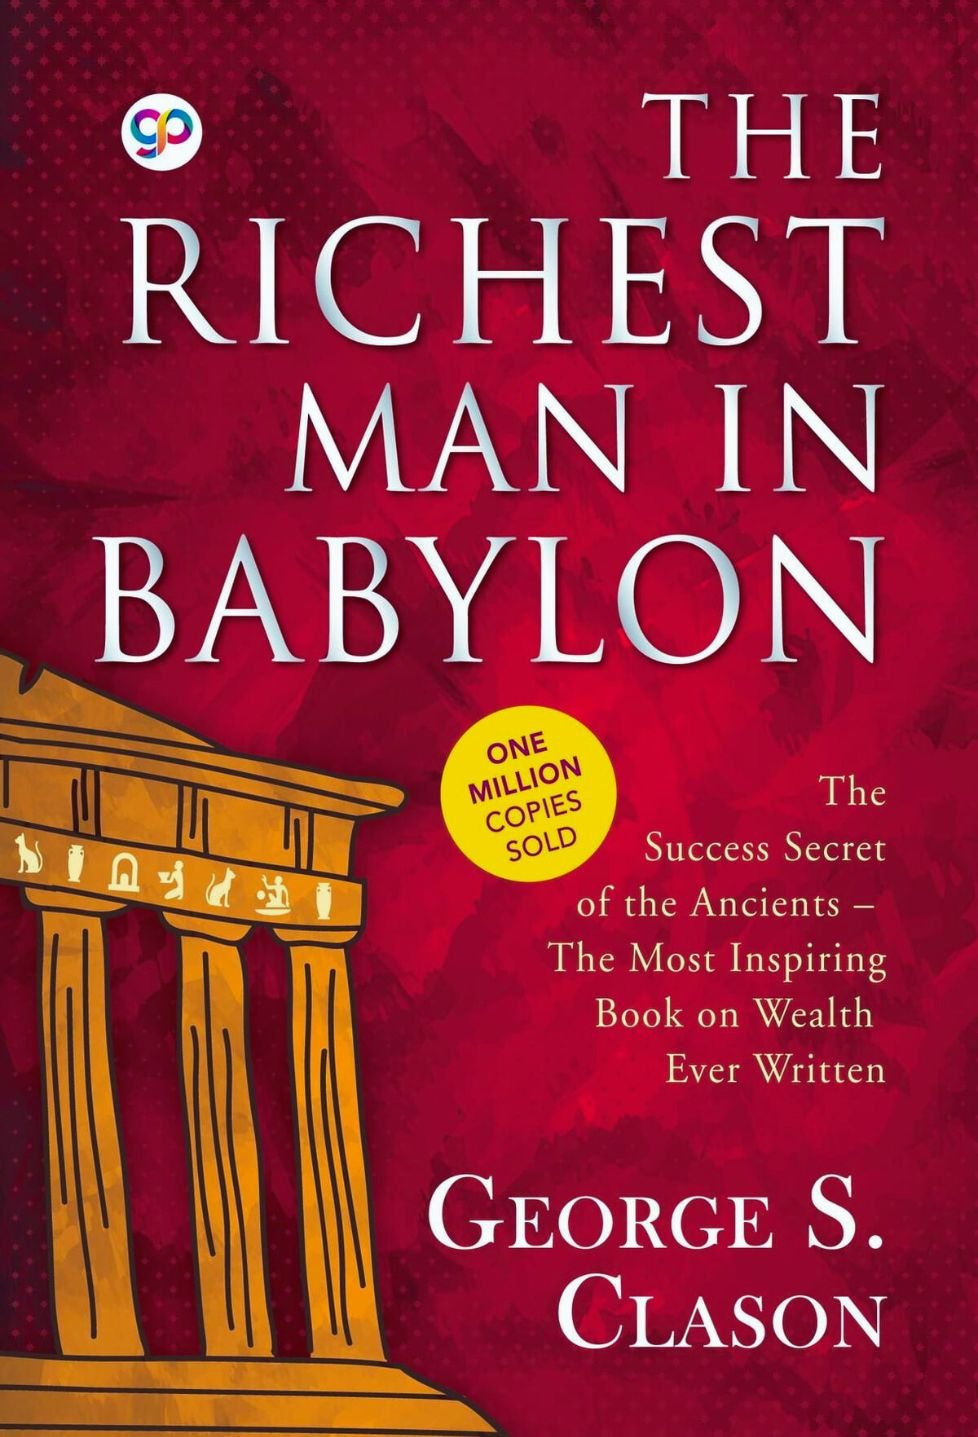 The Richest Man in Babylon Pdf by George S. Clason